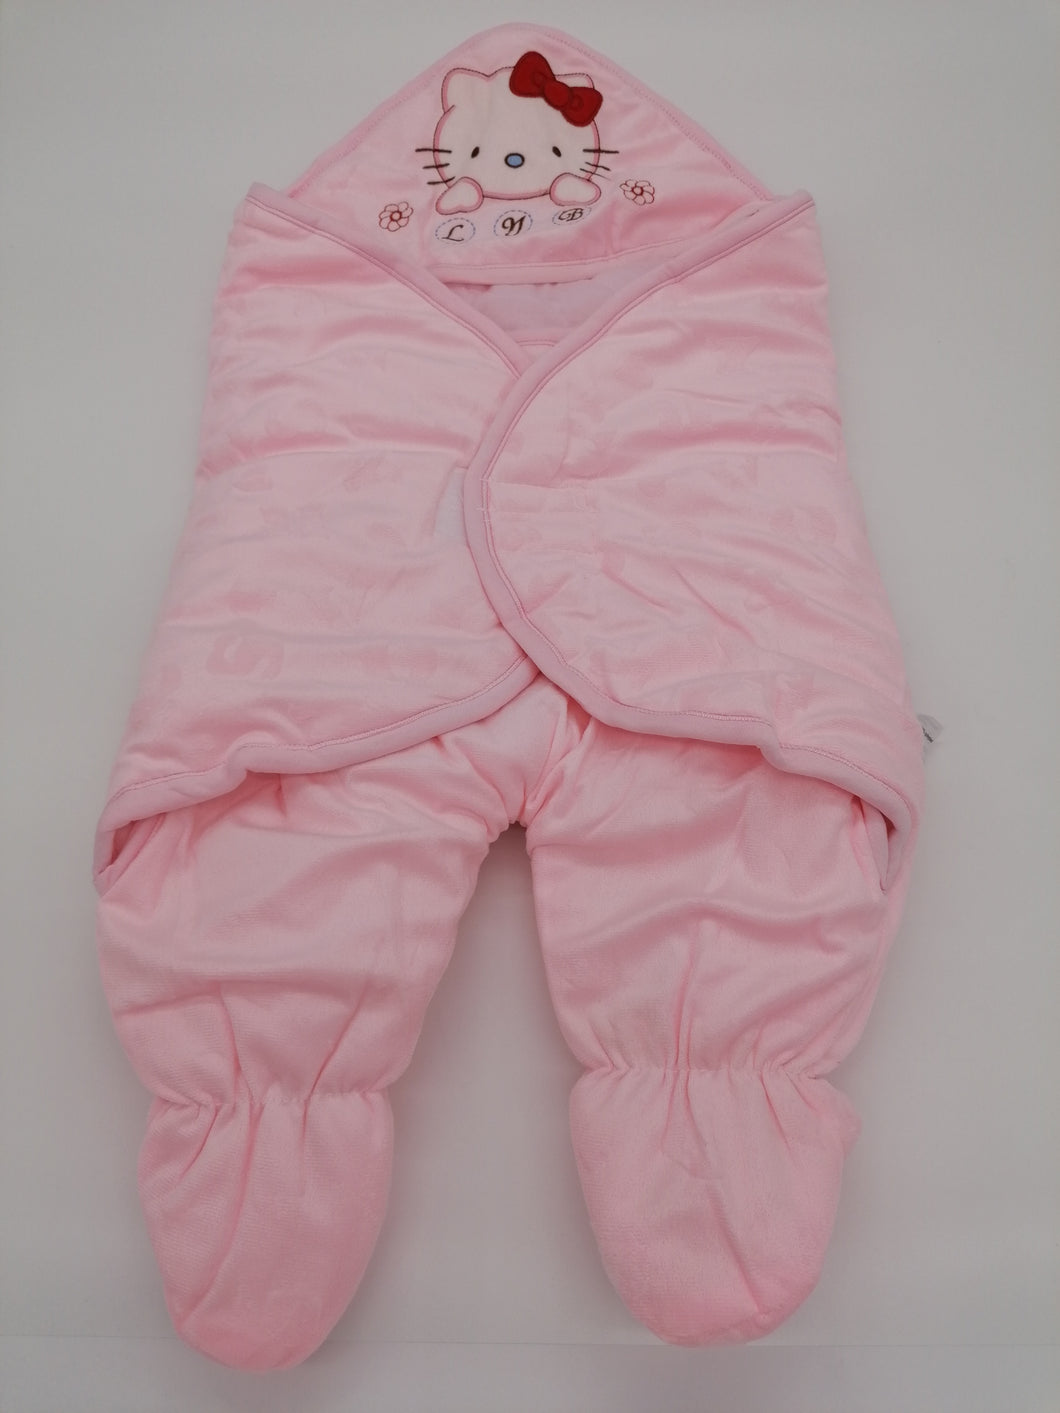 Swaddle Me Soft Padded Pink Kitty Blanket 6 Months